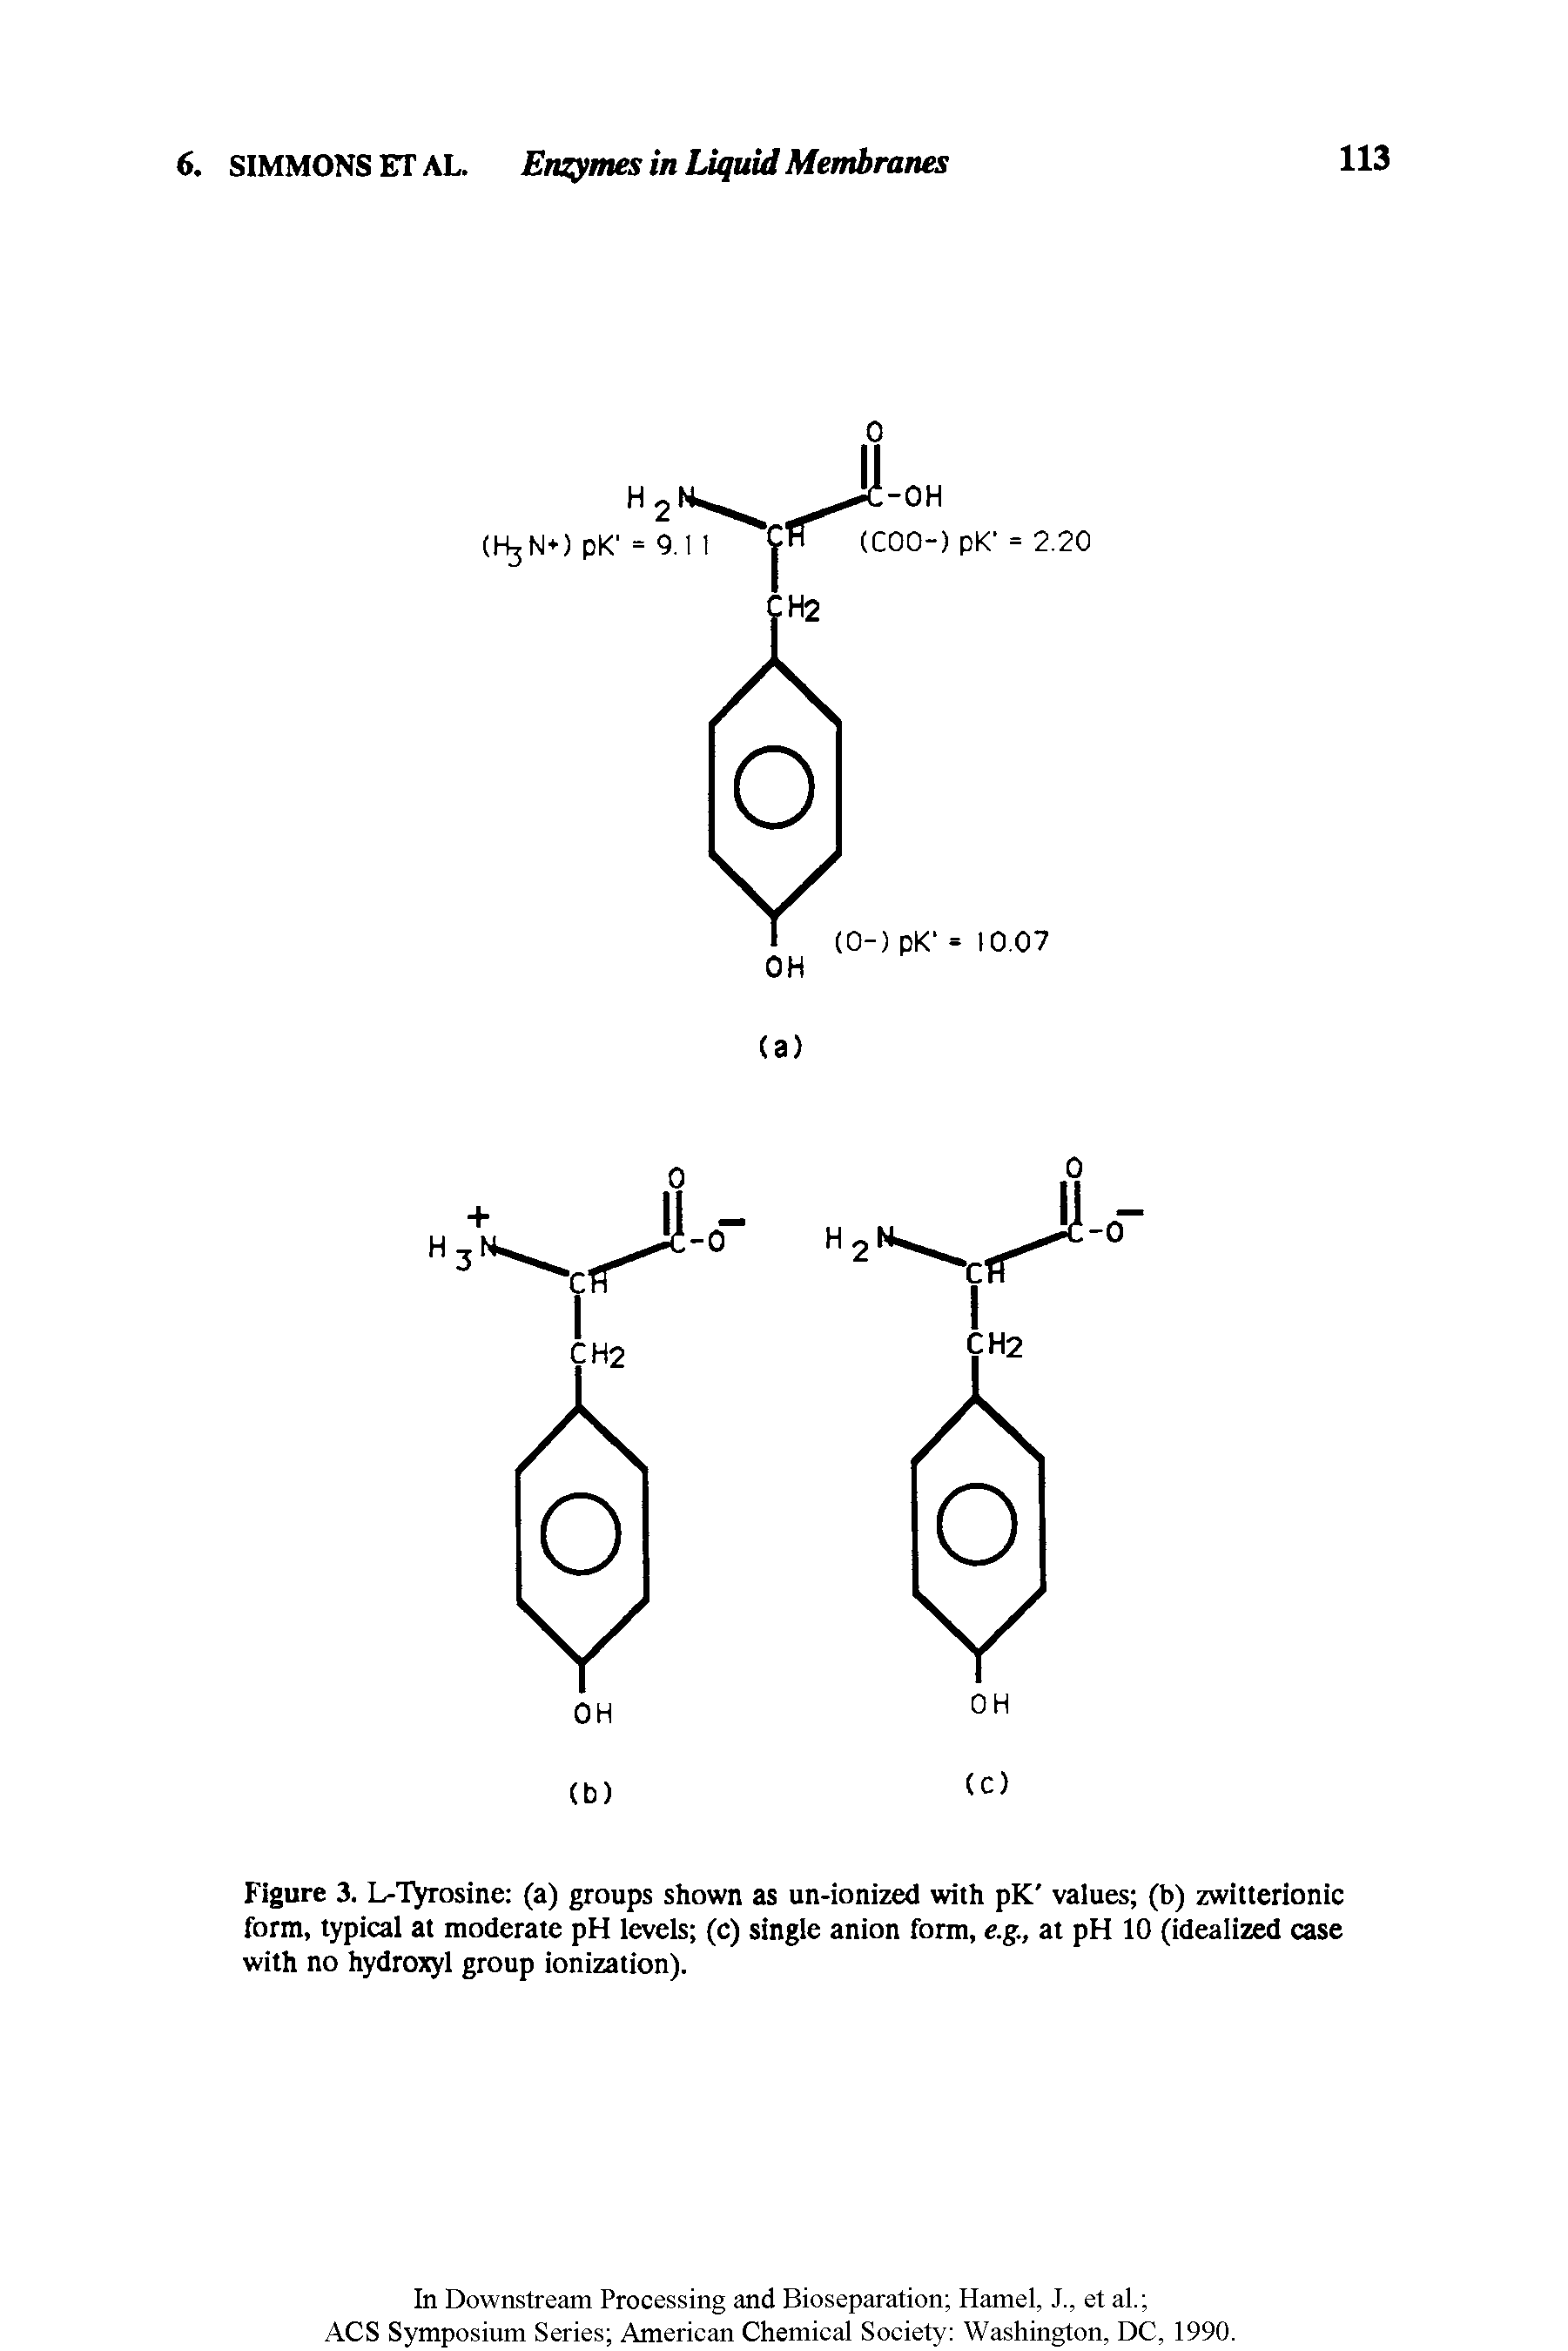 Figure 3. L-Tyrosine (a) groups shown as un-ionized with pK values (b) zwitterionic form, typical at moderate pH levels (c) single anion form, e.g., at pH 10 (idealized case with no hydroxyl group ionization).